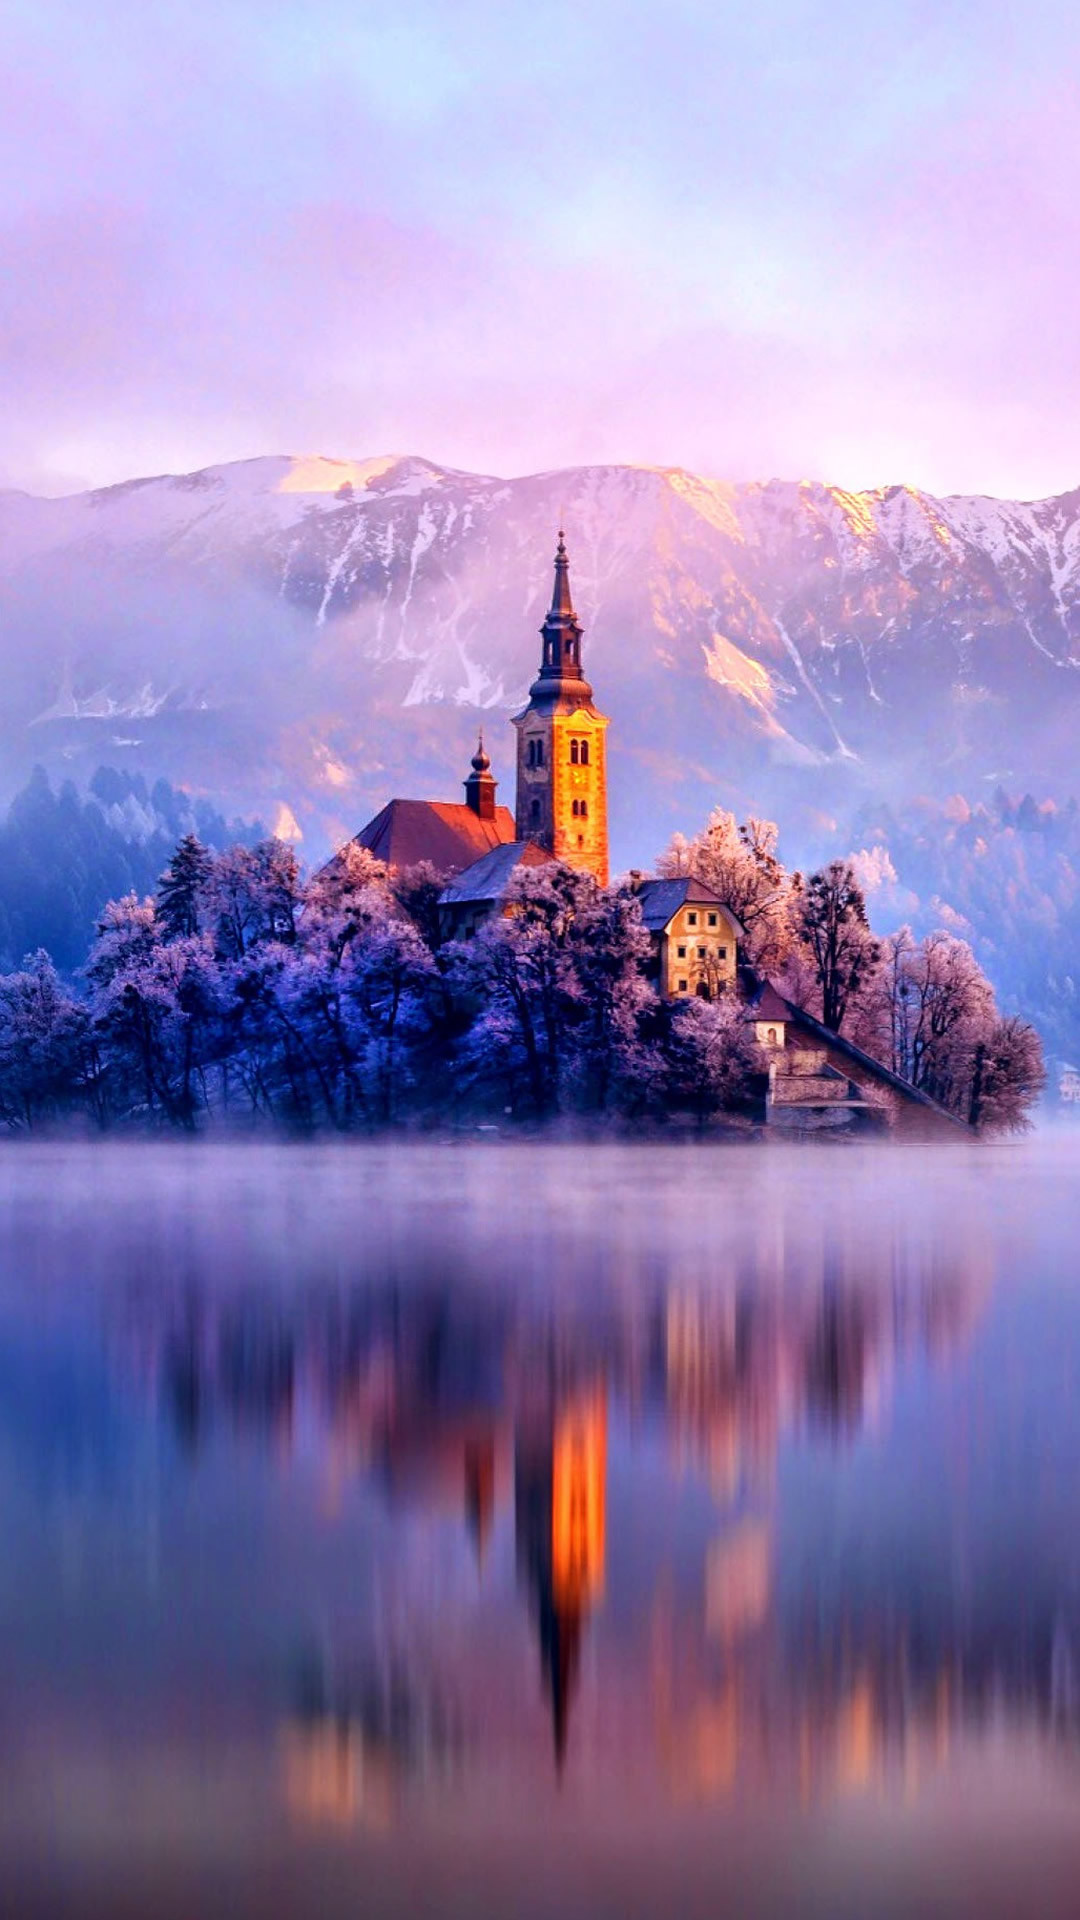 1080x1920 ... lake monastery fortress winter iphone 8 wallpaper download ...